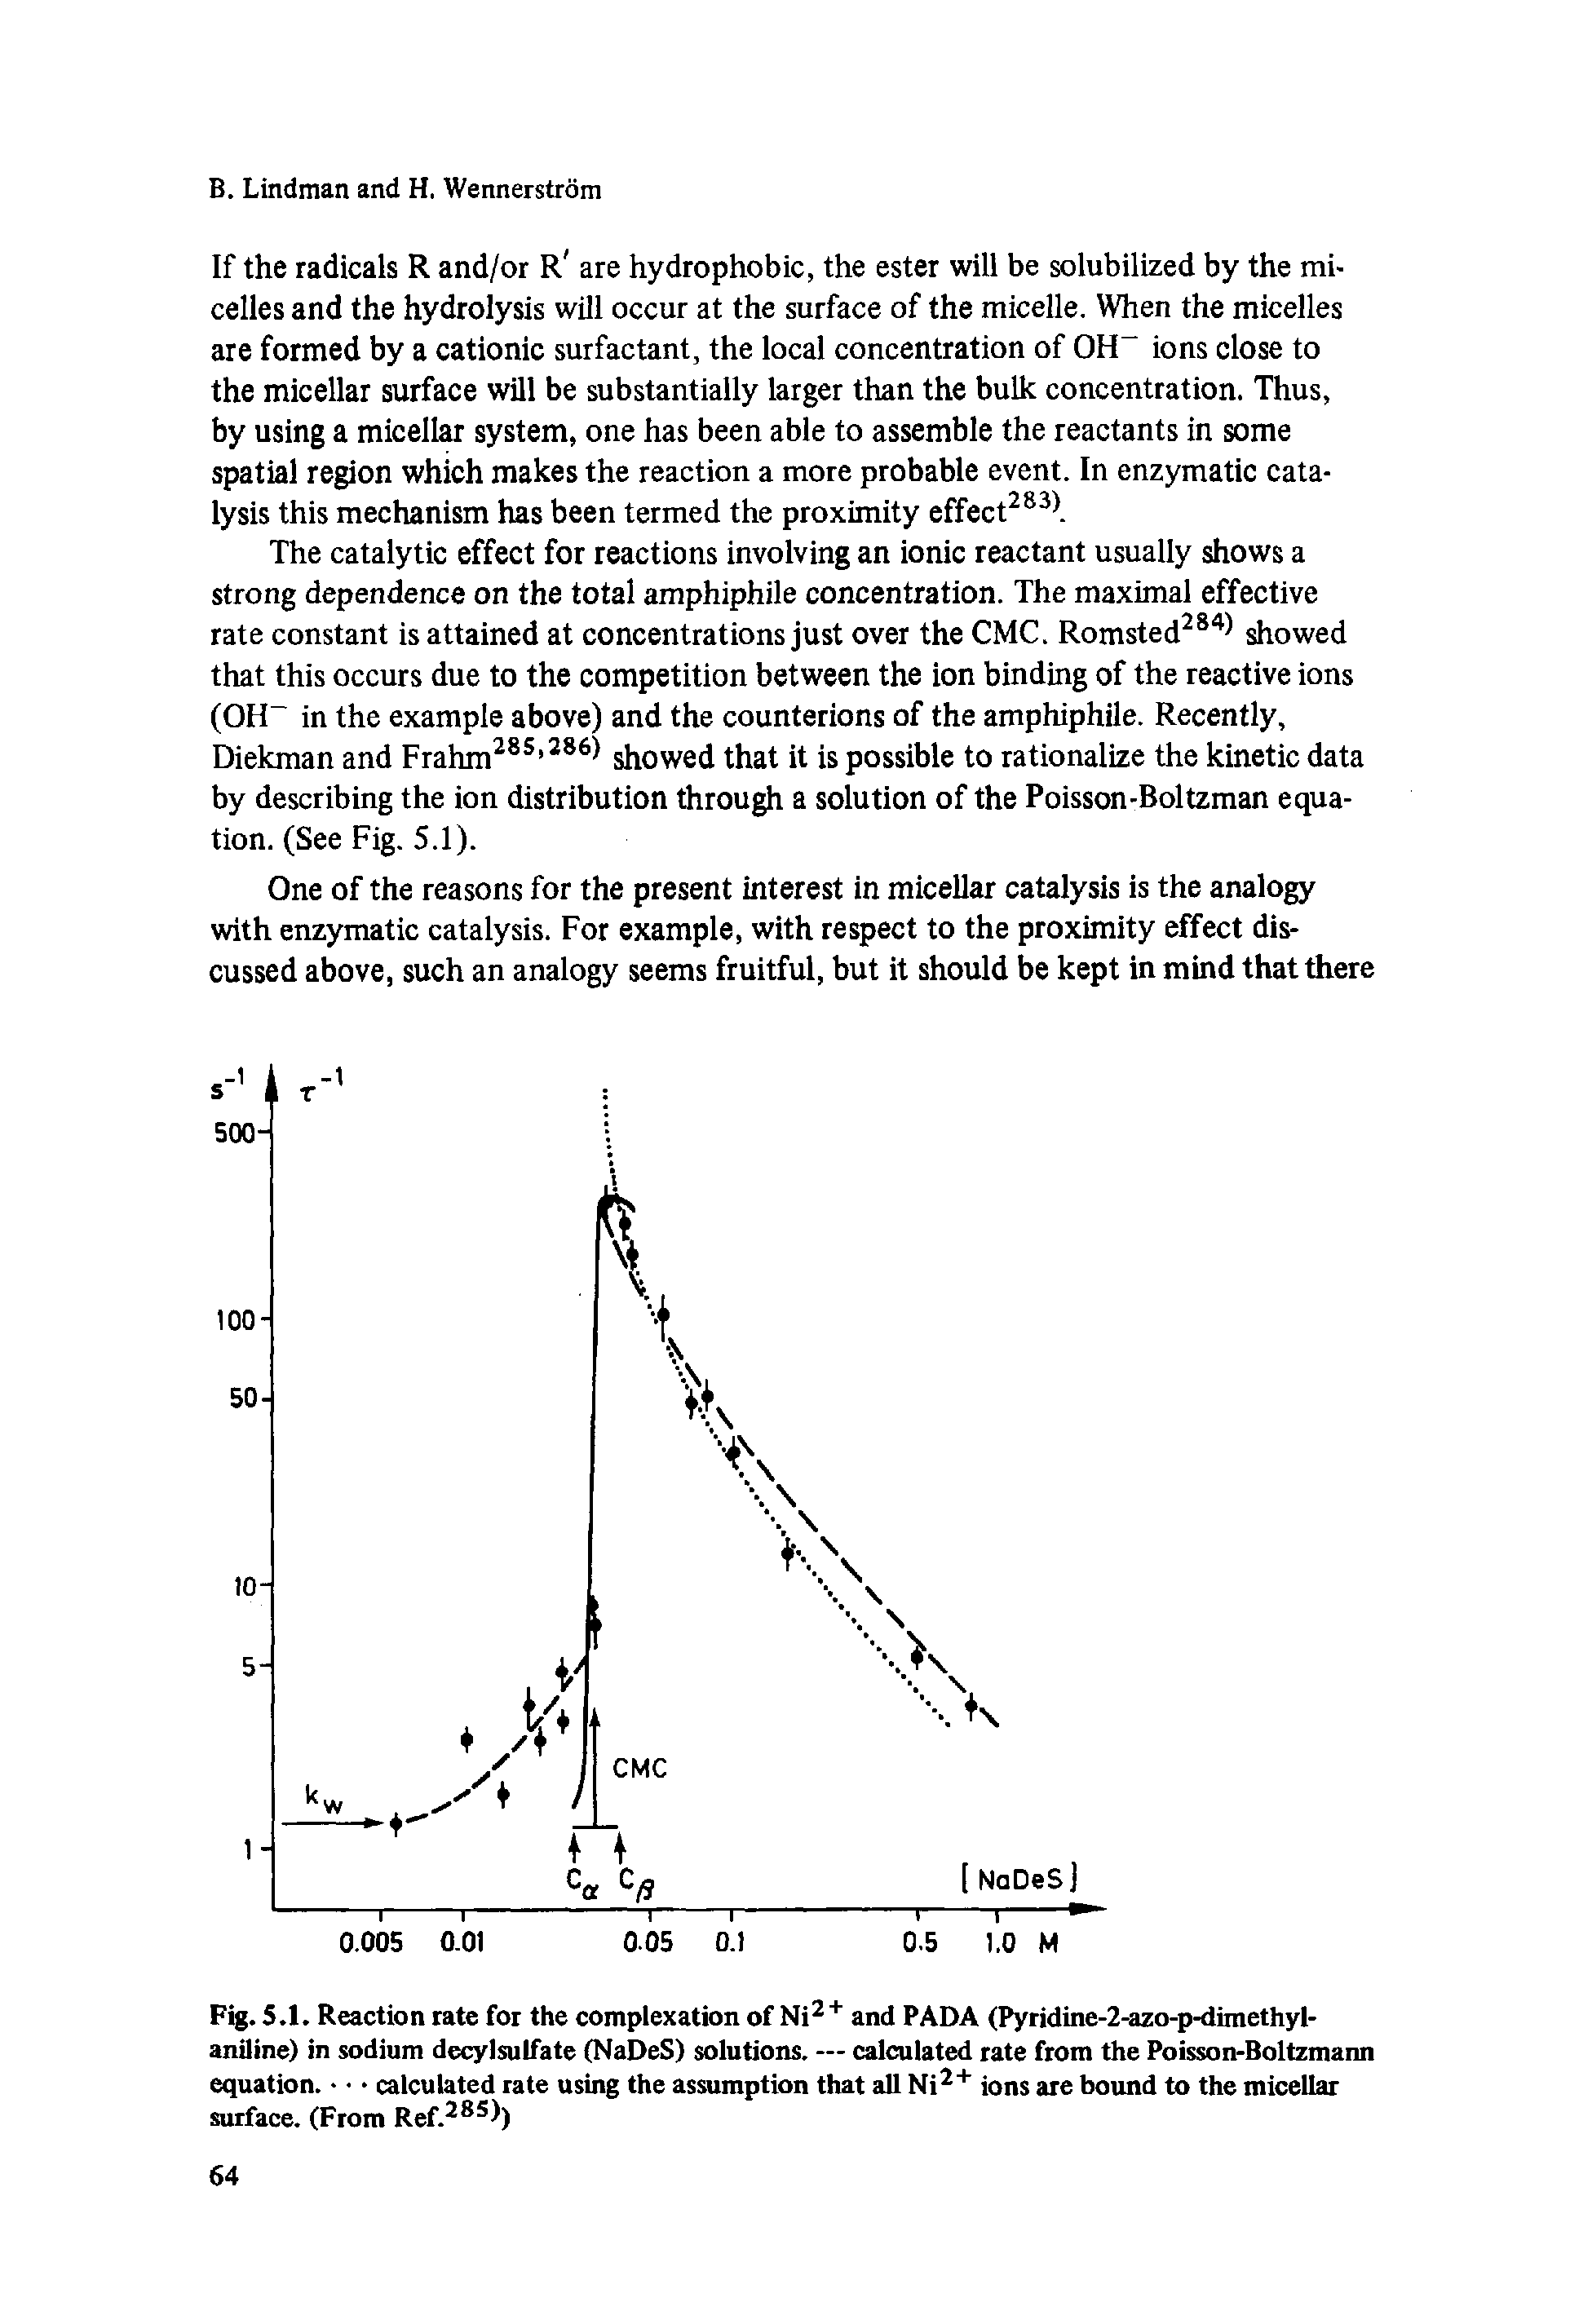 Fig. 5.1. Reaction rate for the complexation of Ni2 + and PADA (Pyridine-2-azo-p-dimethyl-aniline) in sodium decylsulfate (NaDeS) solutions. — calculated rate from the Poisson-Boltzmann equation. - calculated rate using the assumption that all Ni2+ ions are bound to the micellar surface. (From Ref.285 )...